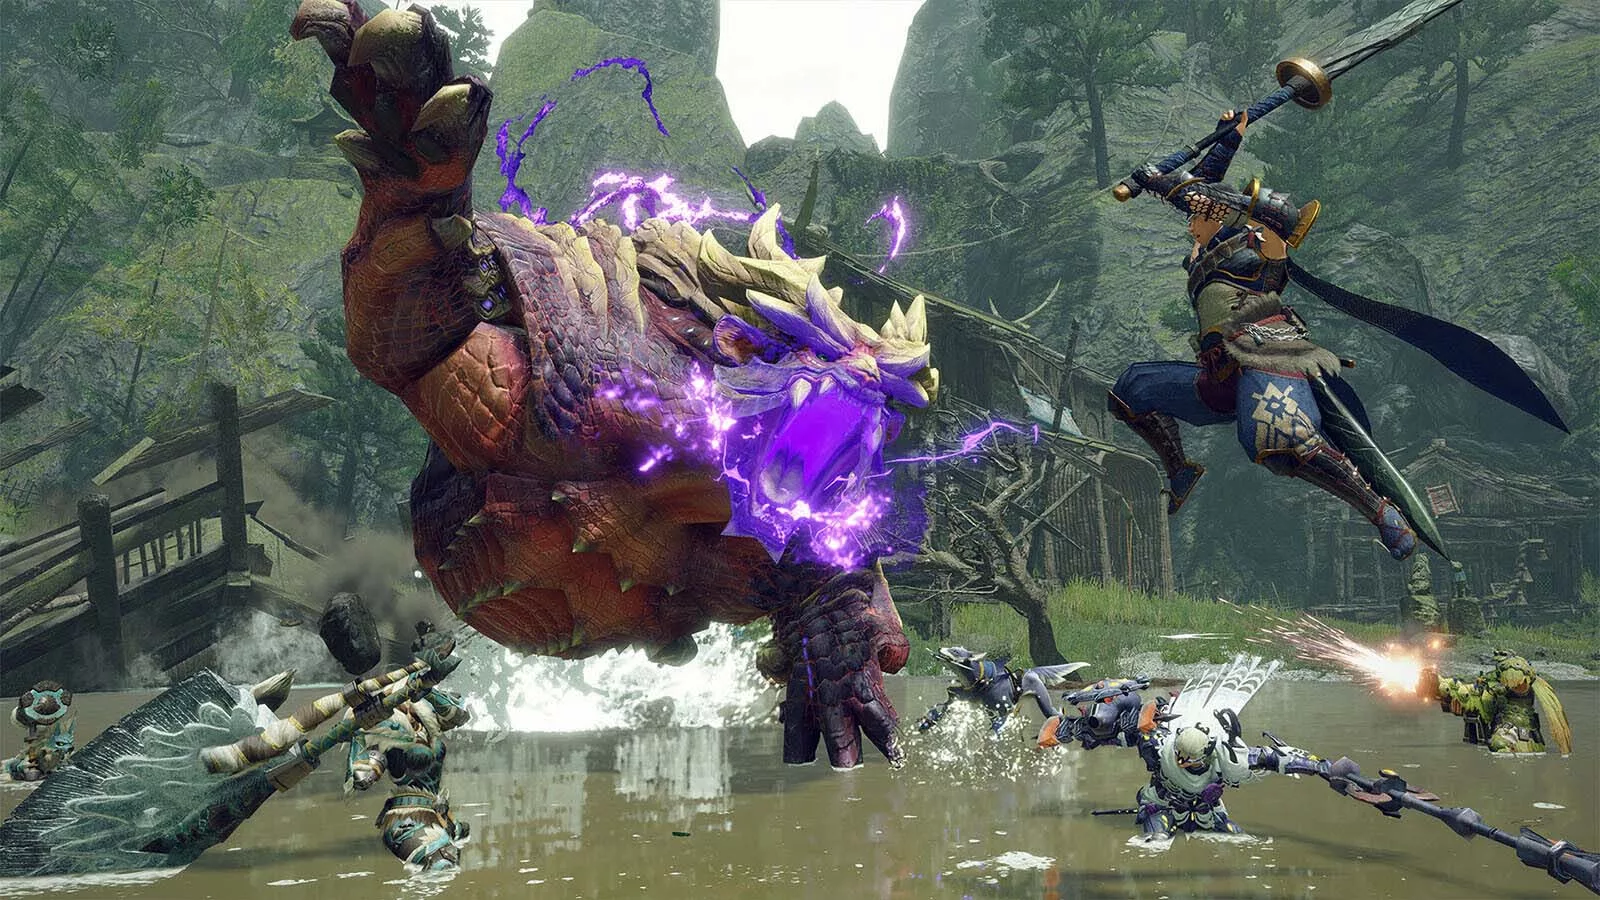 A video game screenshot of two armored characters fighting a large horned monster.